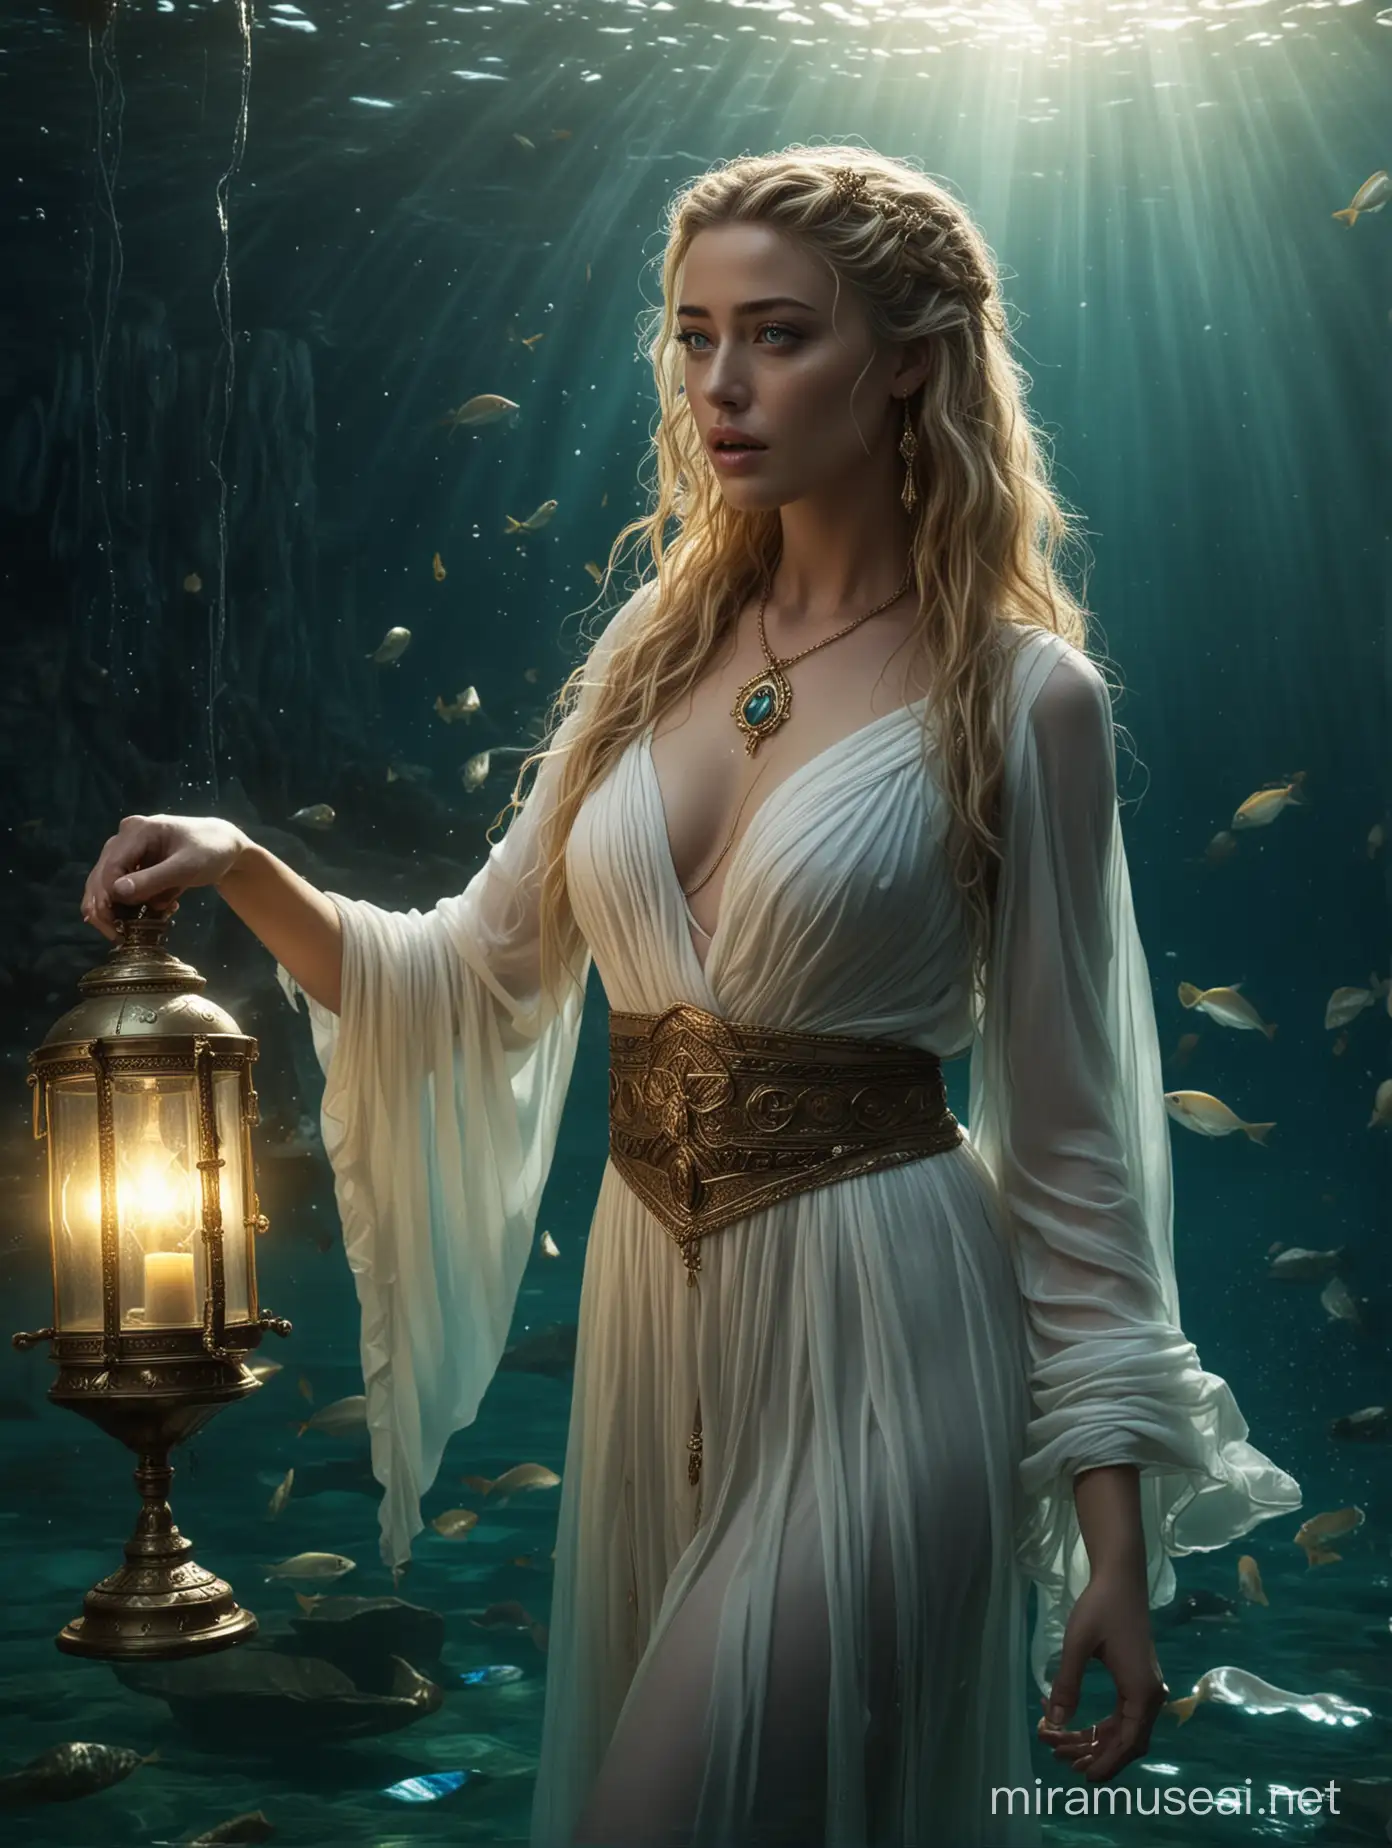 Ethereal Amber Heard as Isis Goddess of the Sea with Lamp Underwater